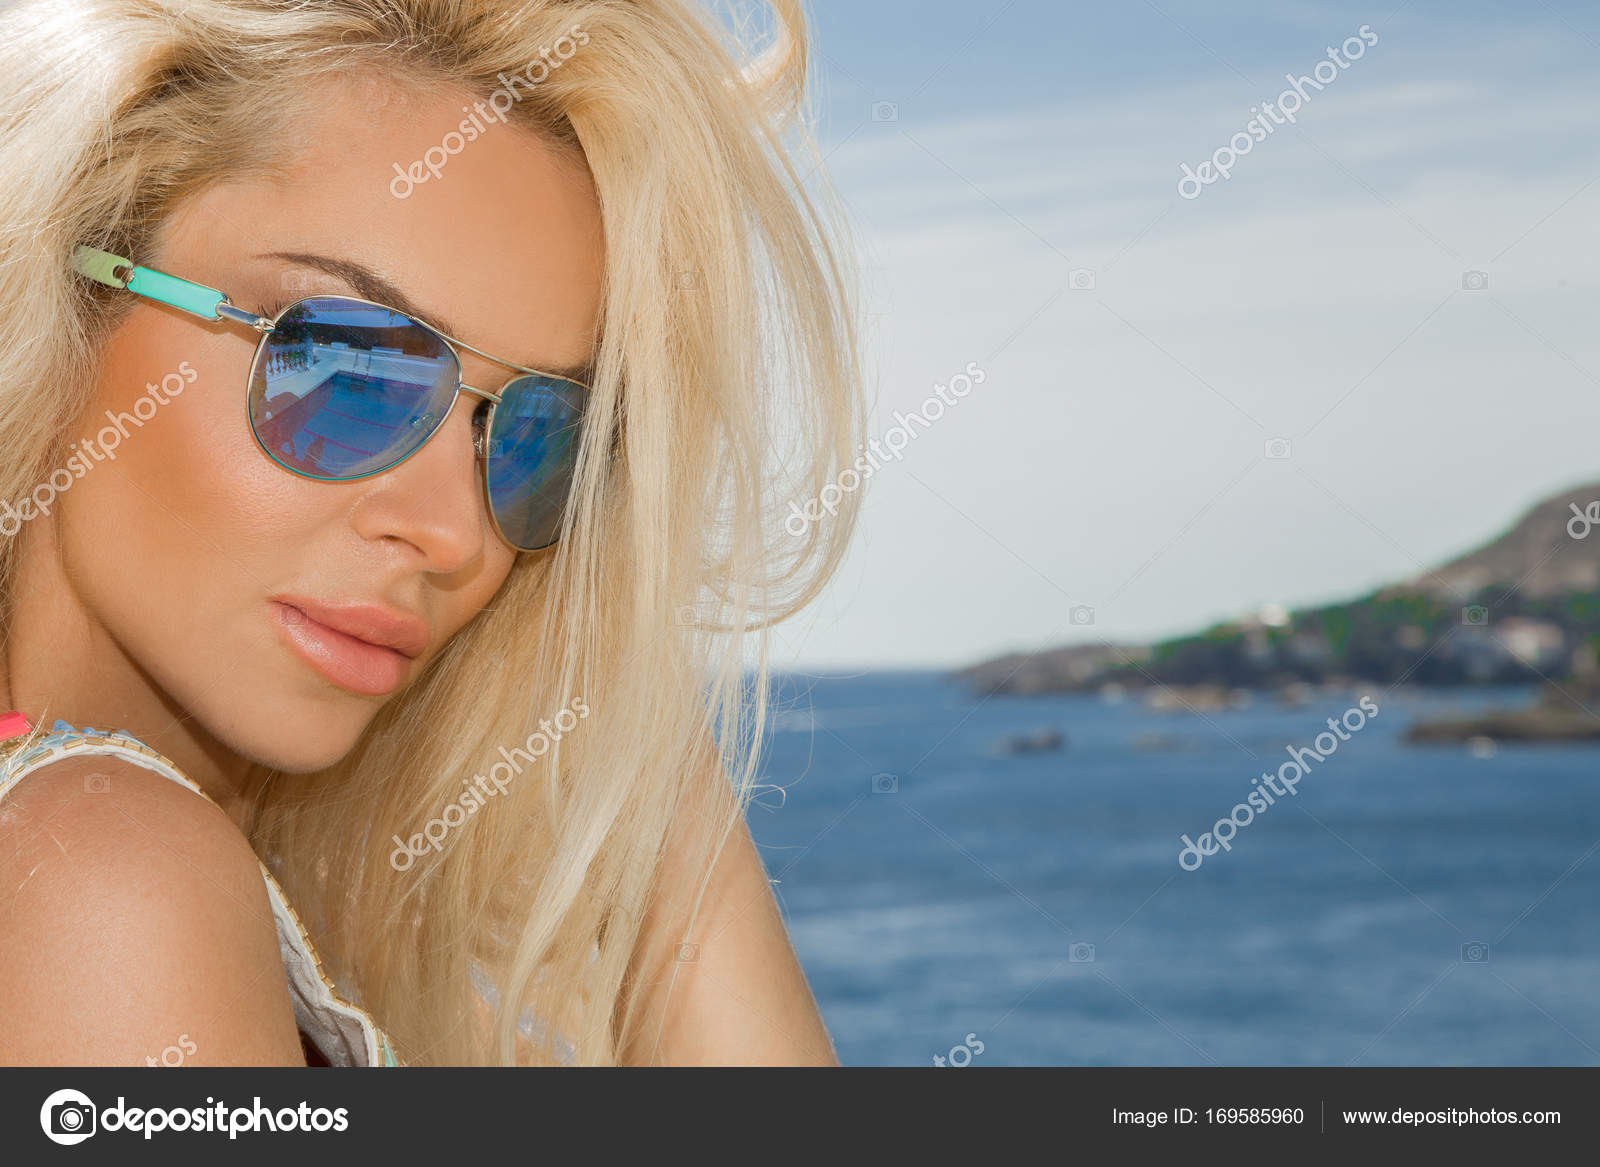 &amp;#208;&nbsp;&amp;#208;&amp;#208;&amp;#209;&amp;#131;&amp;#208;&amp;#209;&amp;#130;&amp;#208;&amp;#209;&amp;#130; &amp;#209;&amp;#129;&amp;#208;&amp;#190; &amp;#209;&amp;#129;&amp;#208;&amp;#208;&amp;#184;&amp;#208;&amp;#186;&amp;#208; &amp;#208;&amp;#208; photos of very beatiful blonde women with sun glasses